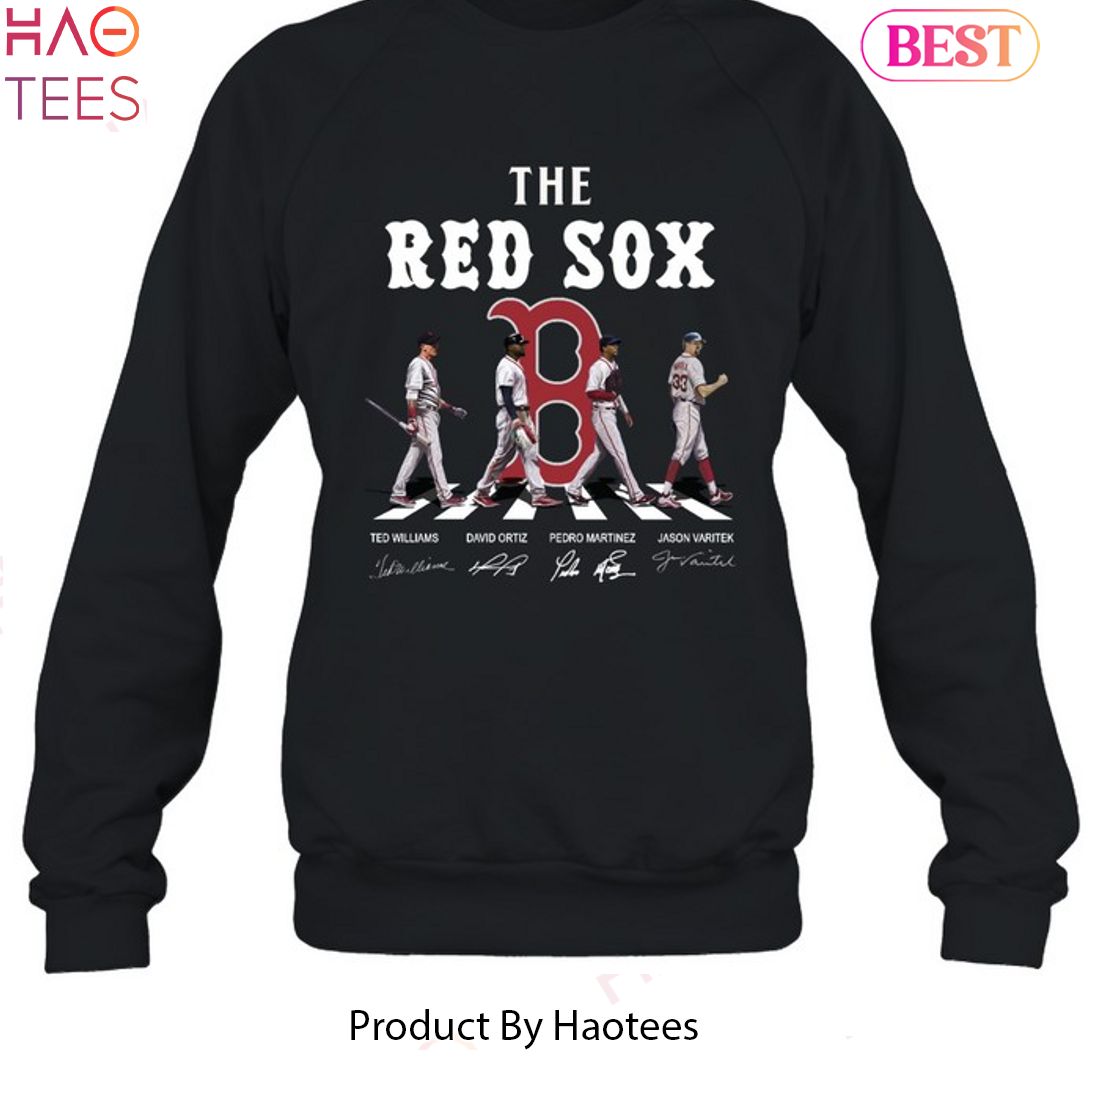 The Boston Red Sox Legend Unisex T-Shirt Limited Edition